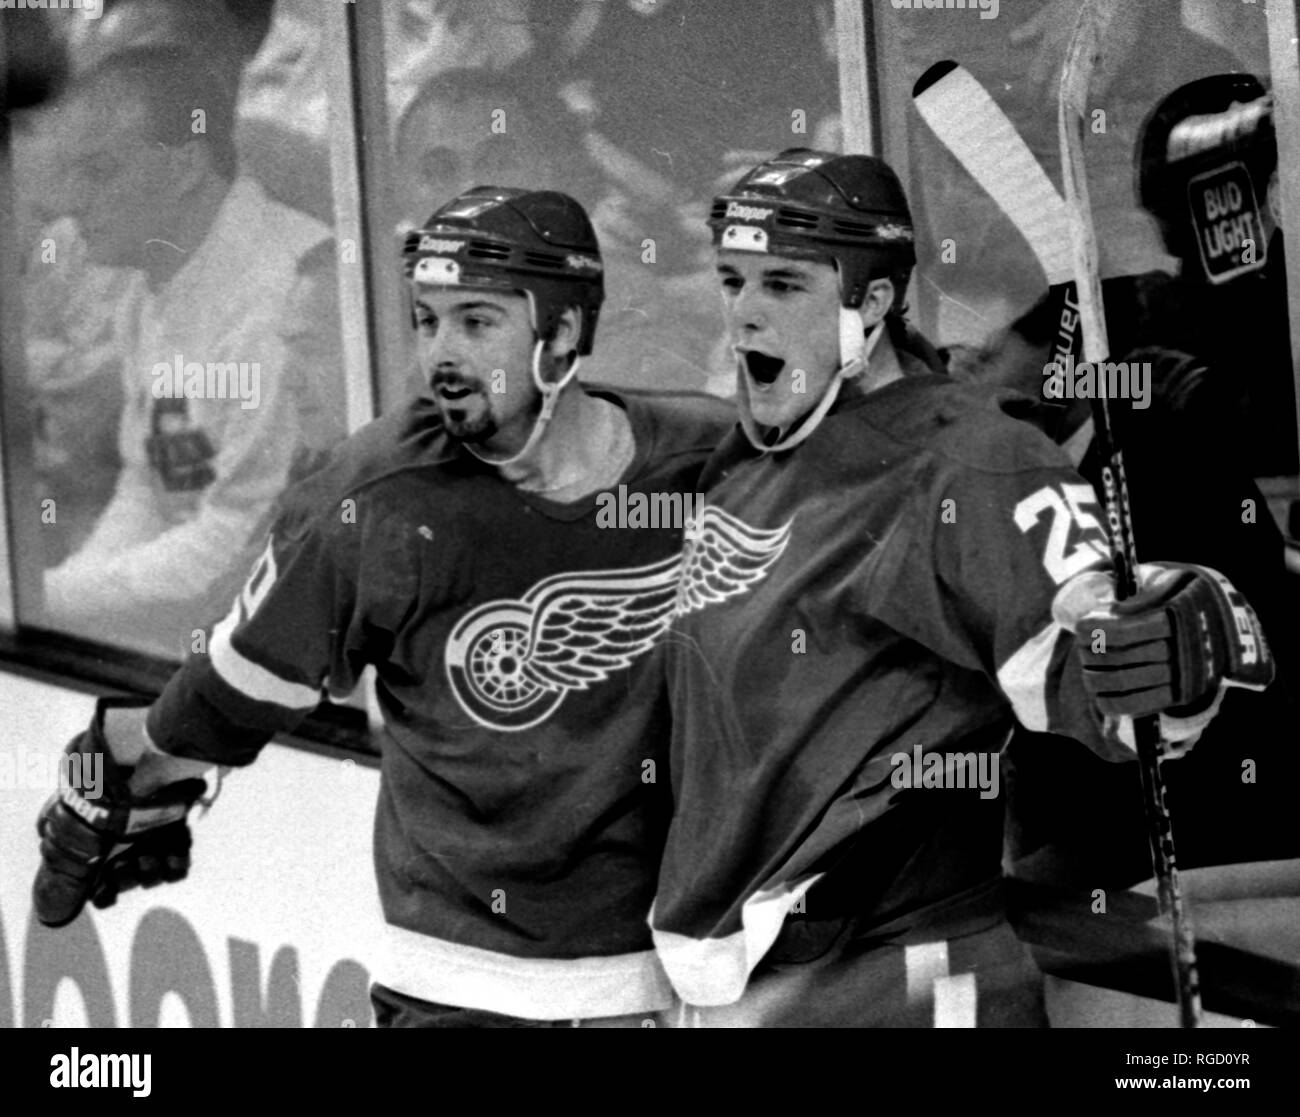 772 Darren Mccarty Photos & High Res Pictures - Getty Images